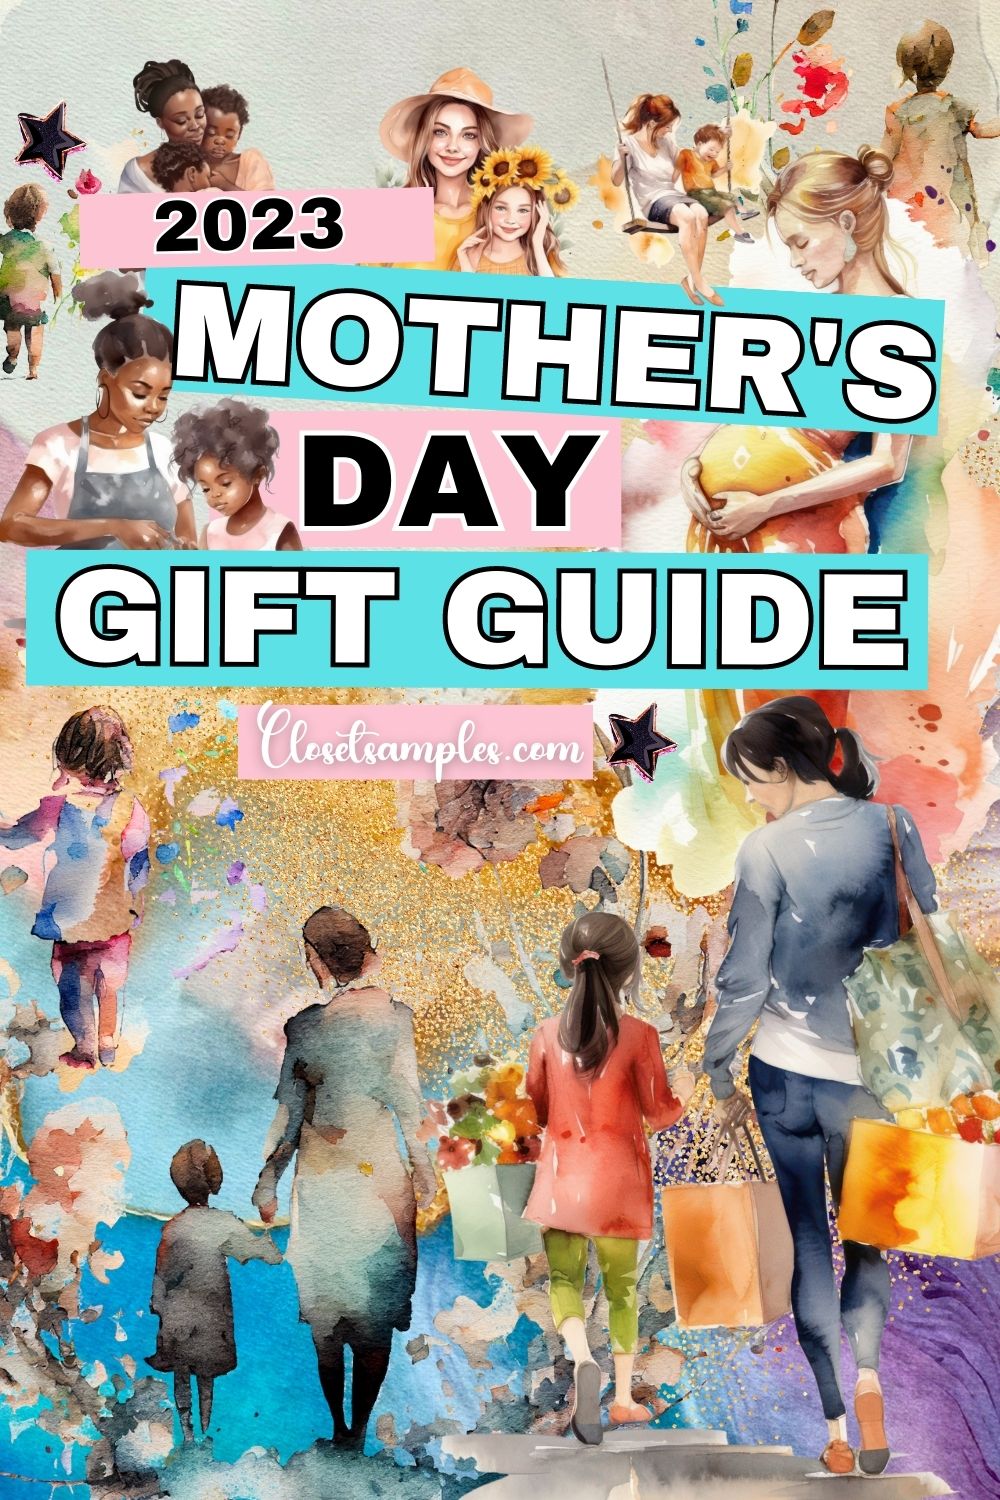 Mothers Day Gifts for 2023 A Comprehensive Gift Guide to Celebrate Mom closetsamples Pinterest Pin 1000 1500 px